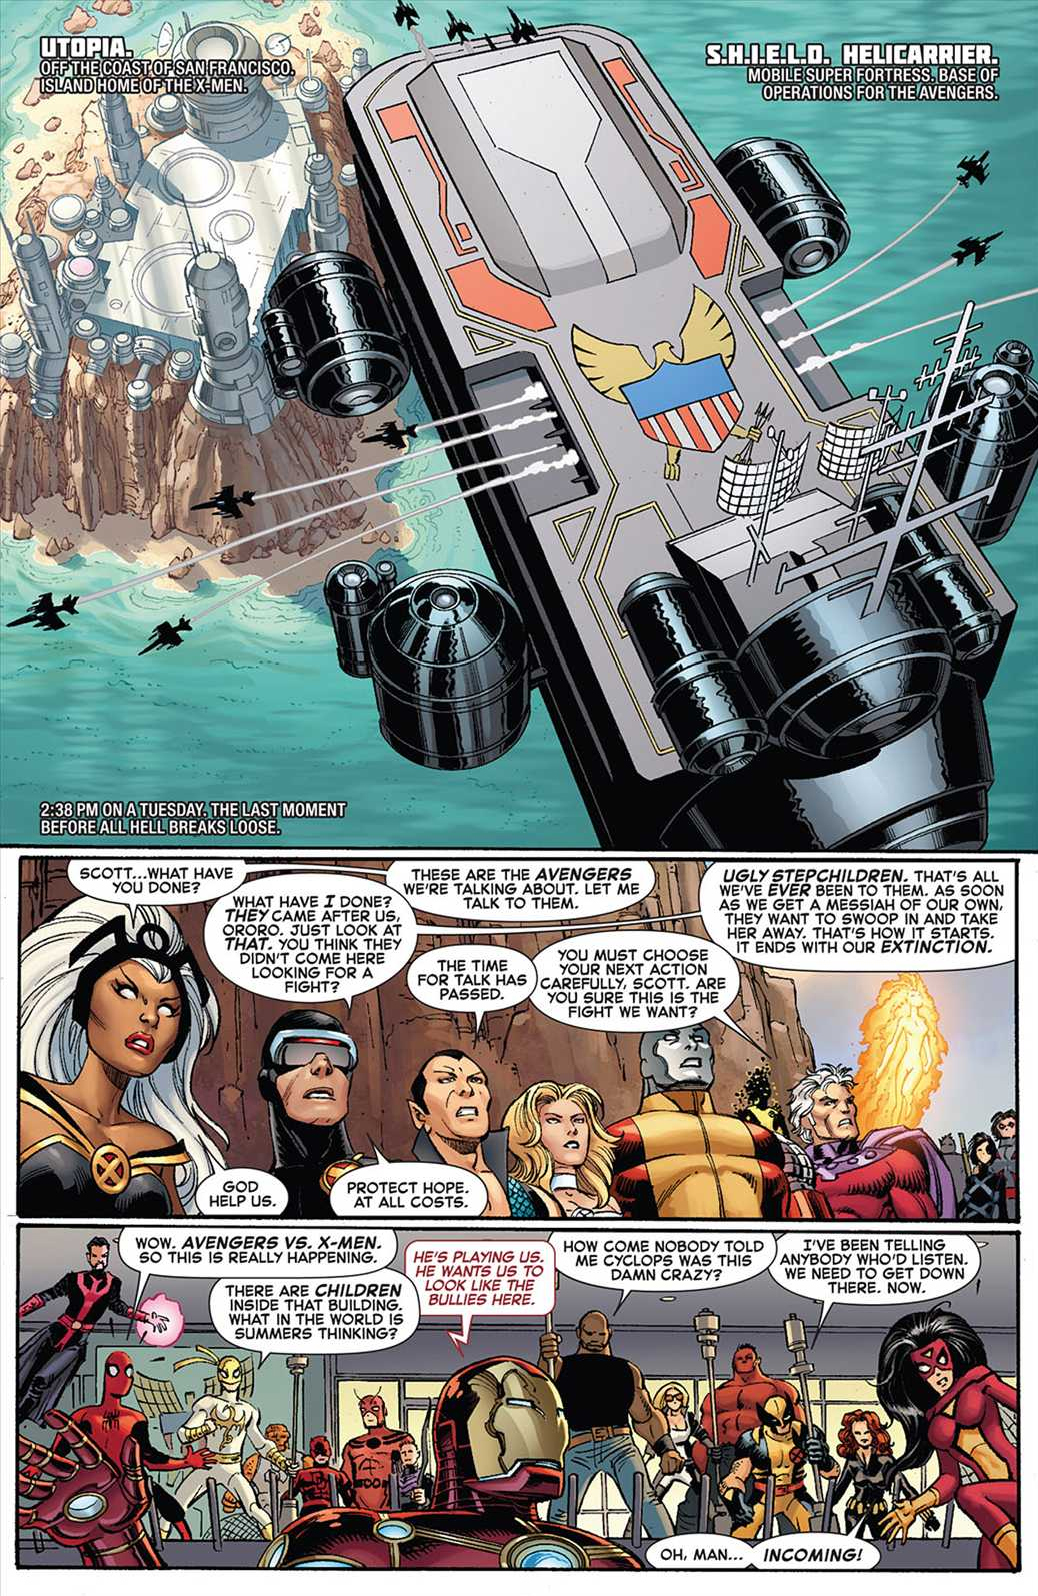 colossus crashes a helicarrier